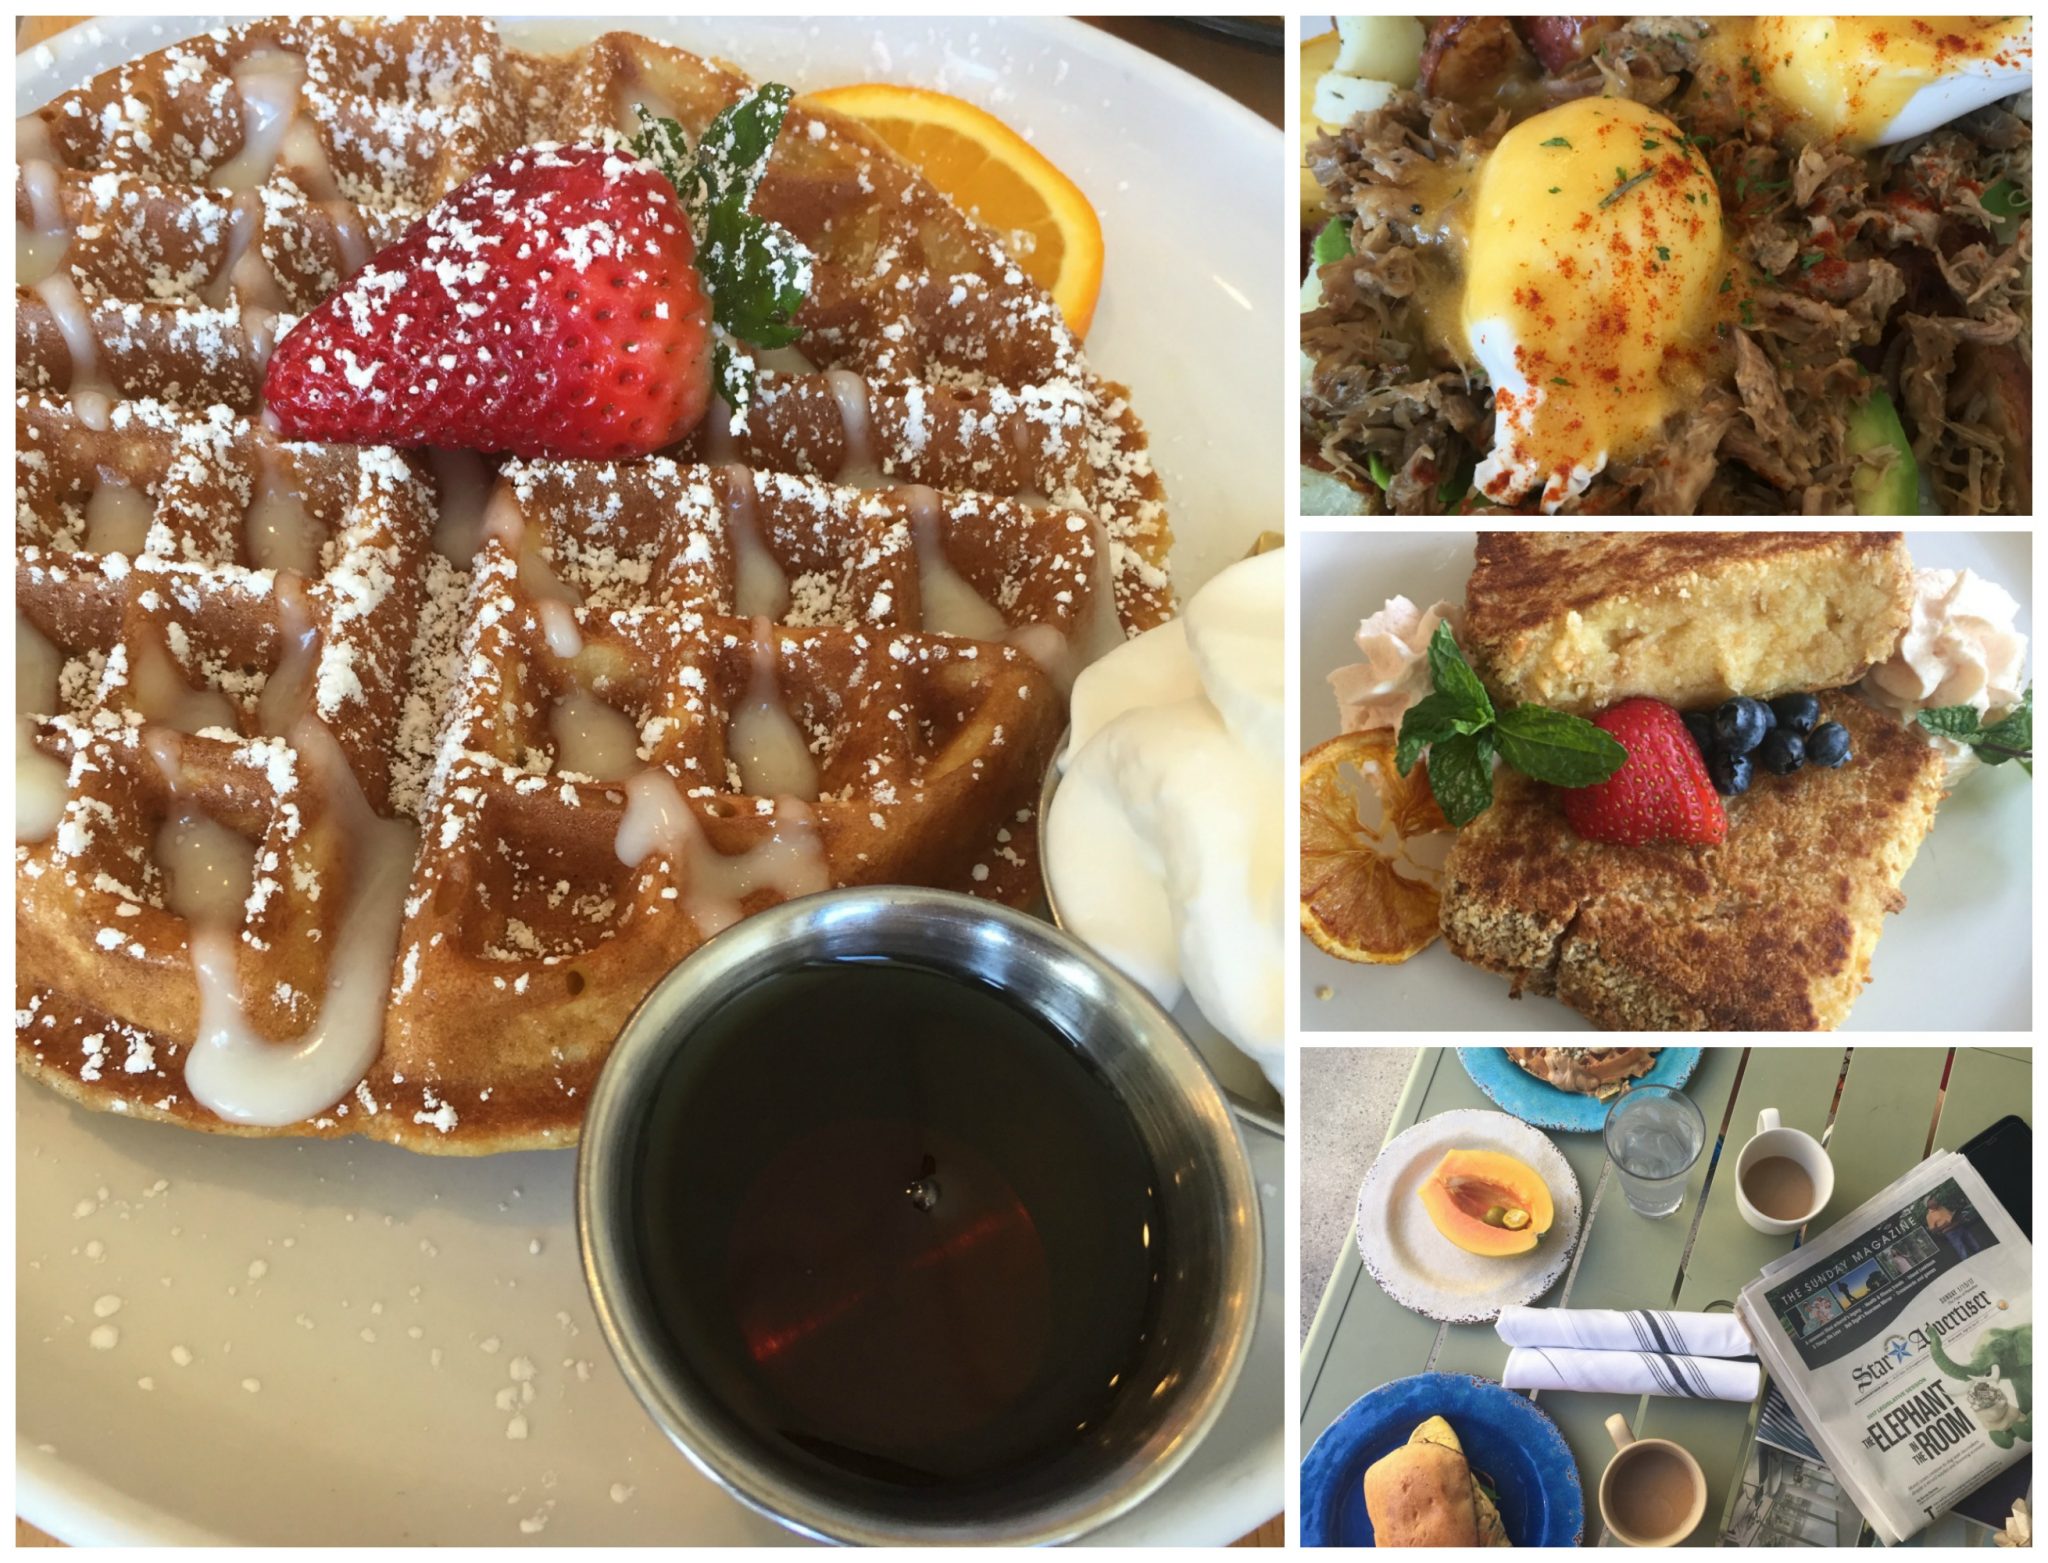 Best Brunch Spots Oahu - Whether you're craving french toast or acai bowls, these are the best spots for brunch on the Hawaiian Island of Oahu - CommuniKait